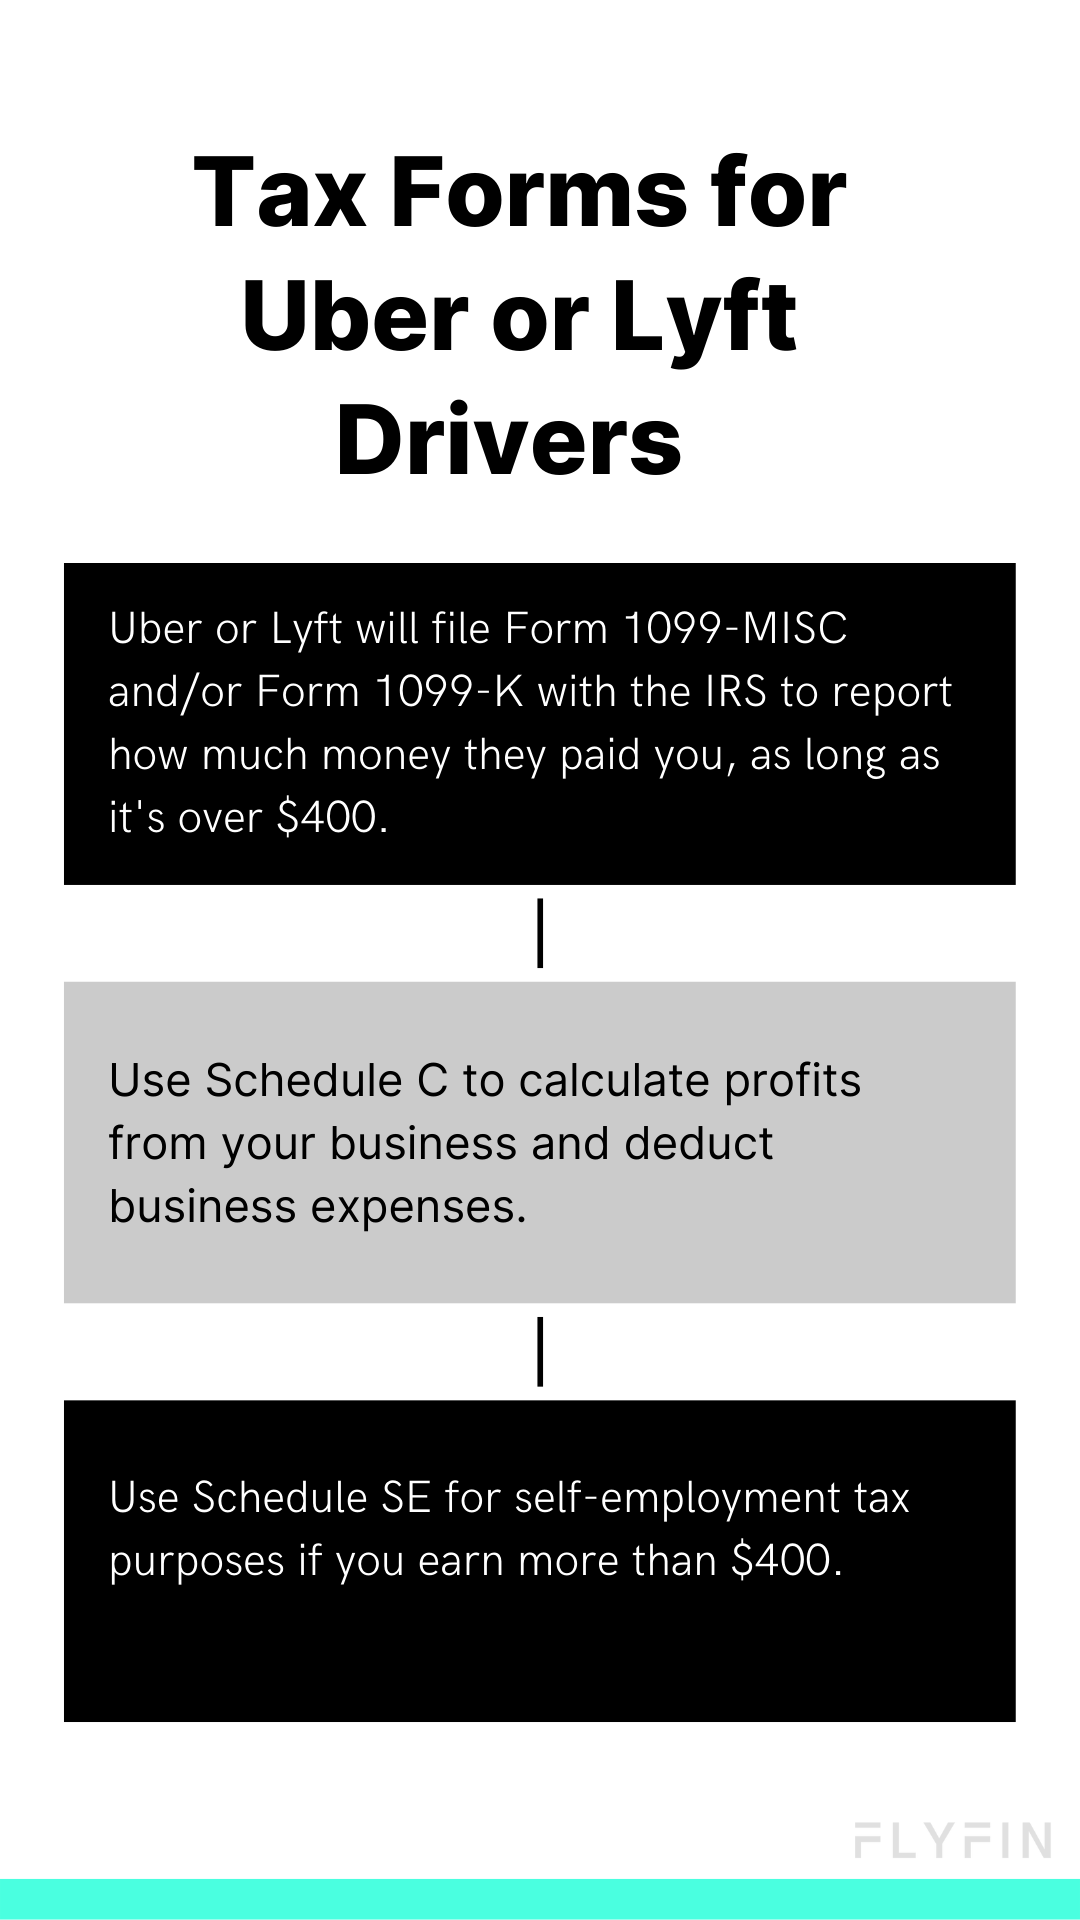 How do you report income as an Uber or Lyft driver?